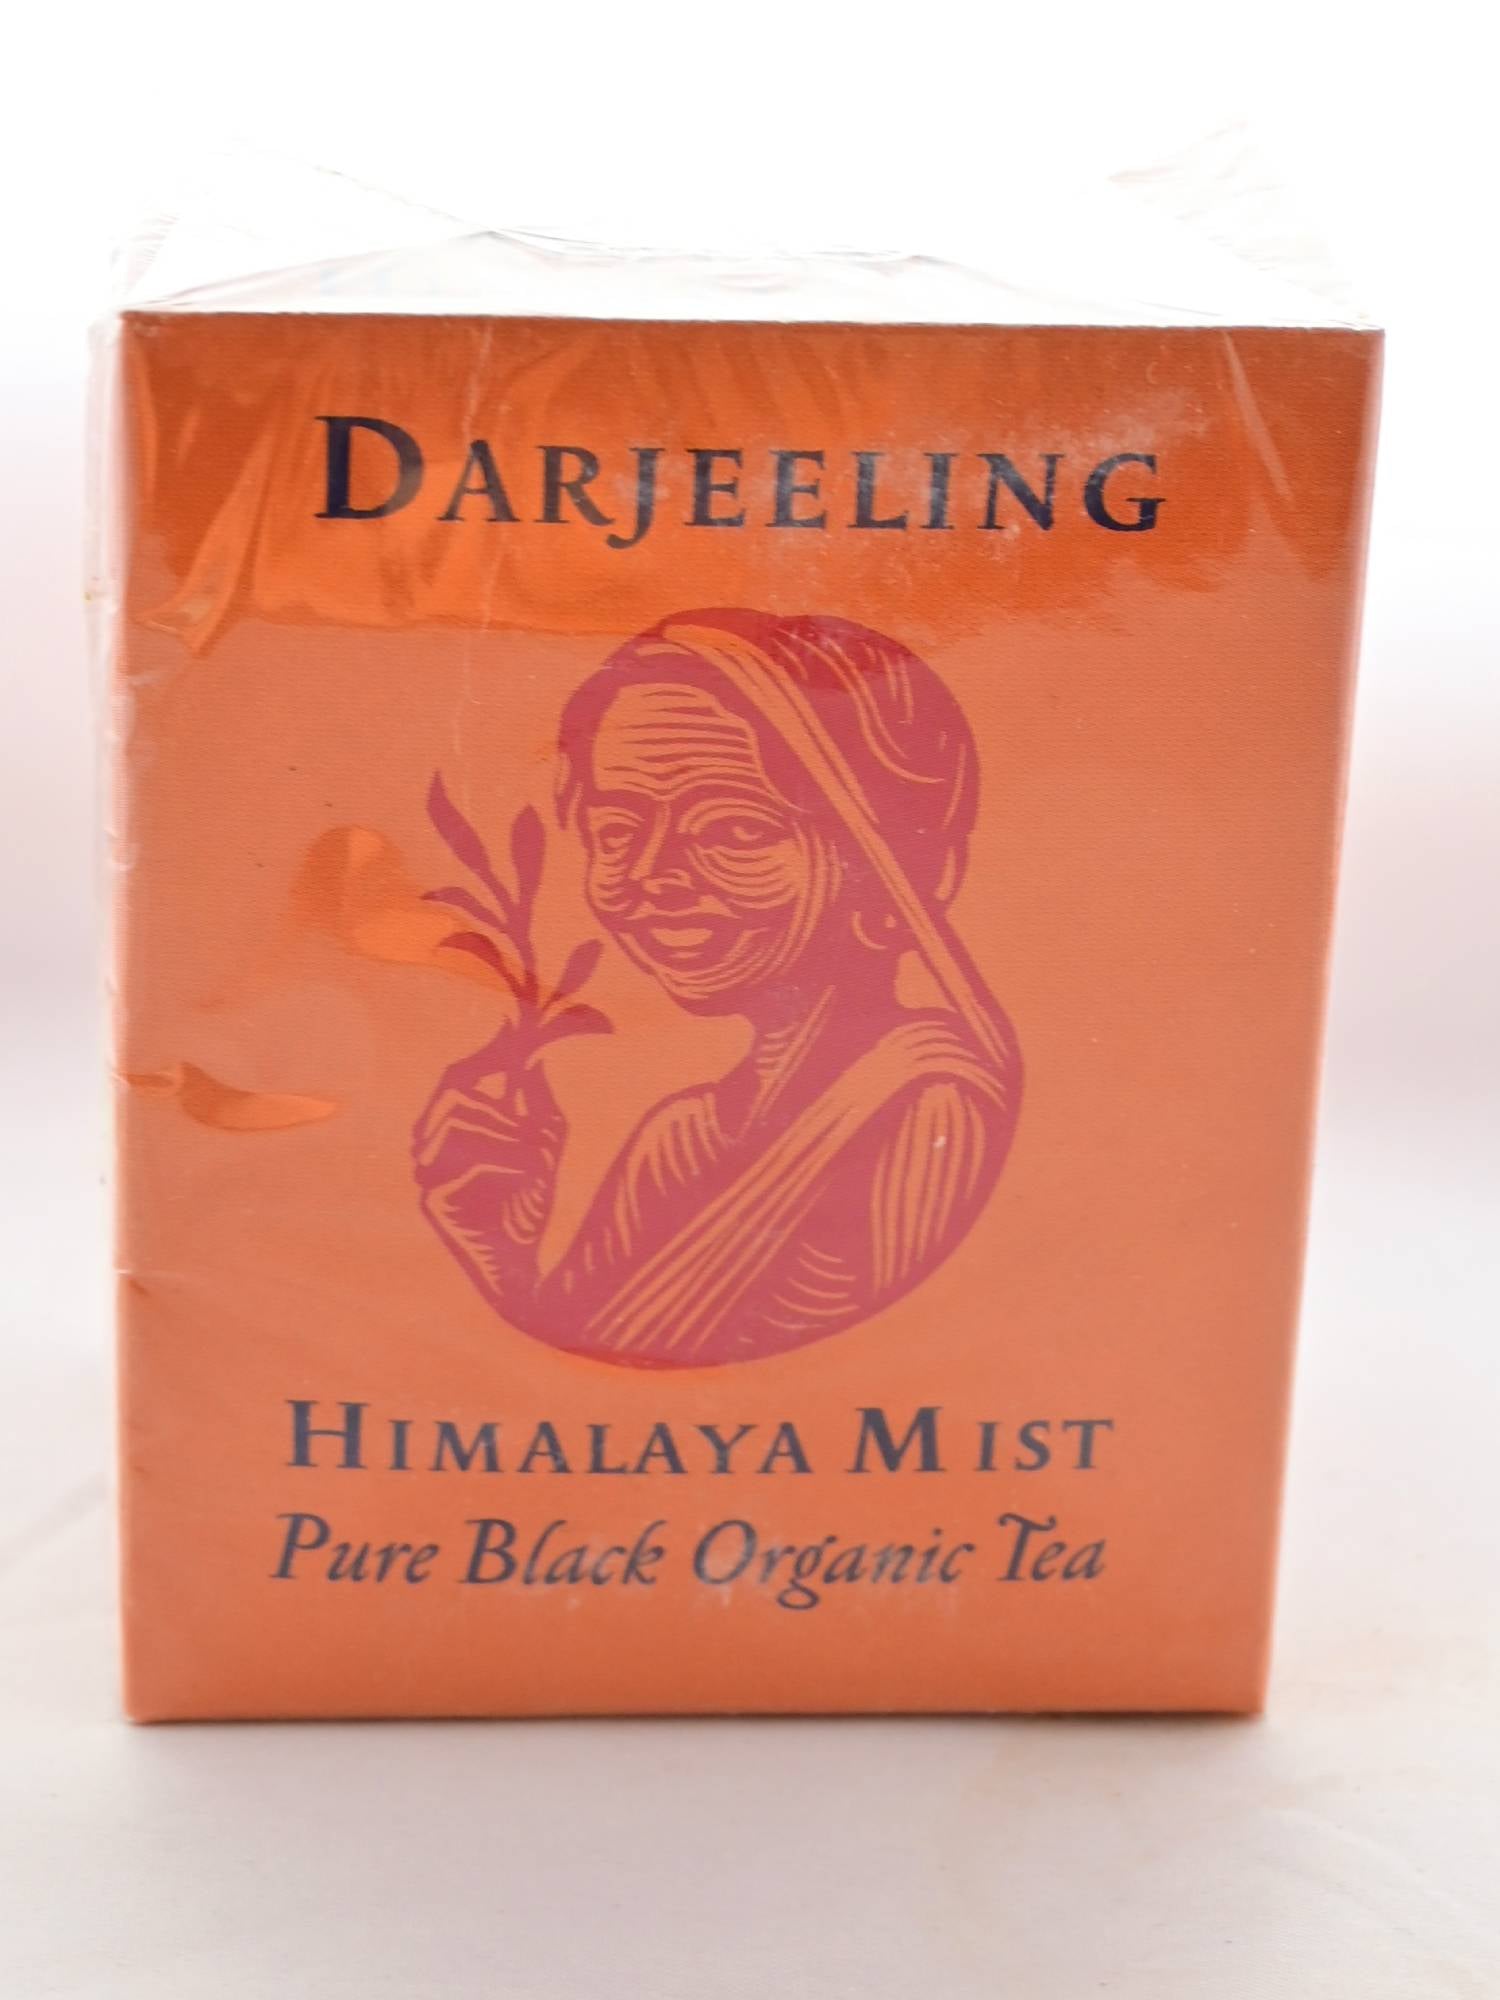 The Darjeeling Himalaya box is a squat orange cube. On the front, a line-drawing of a woman holding a tea plant smiles in red. Black text reads: "Darjeeling. Himalaya Mist. Pure Black Organic Tea."